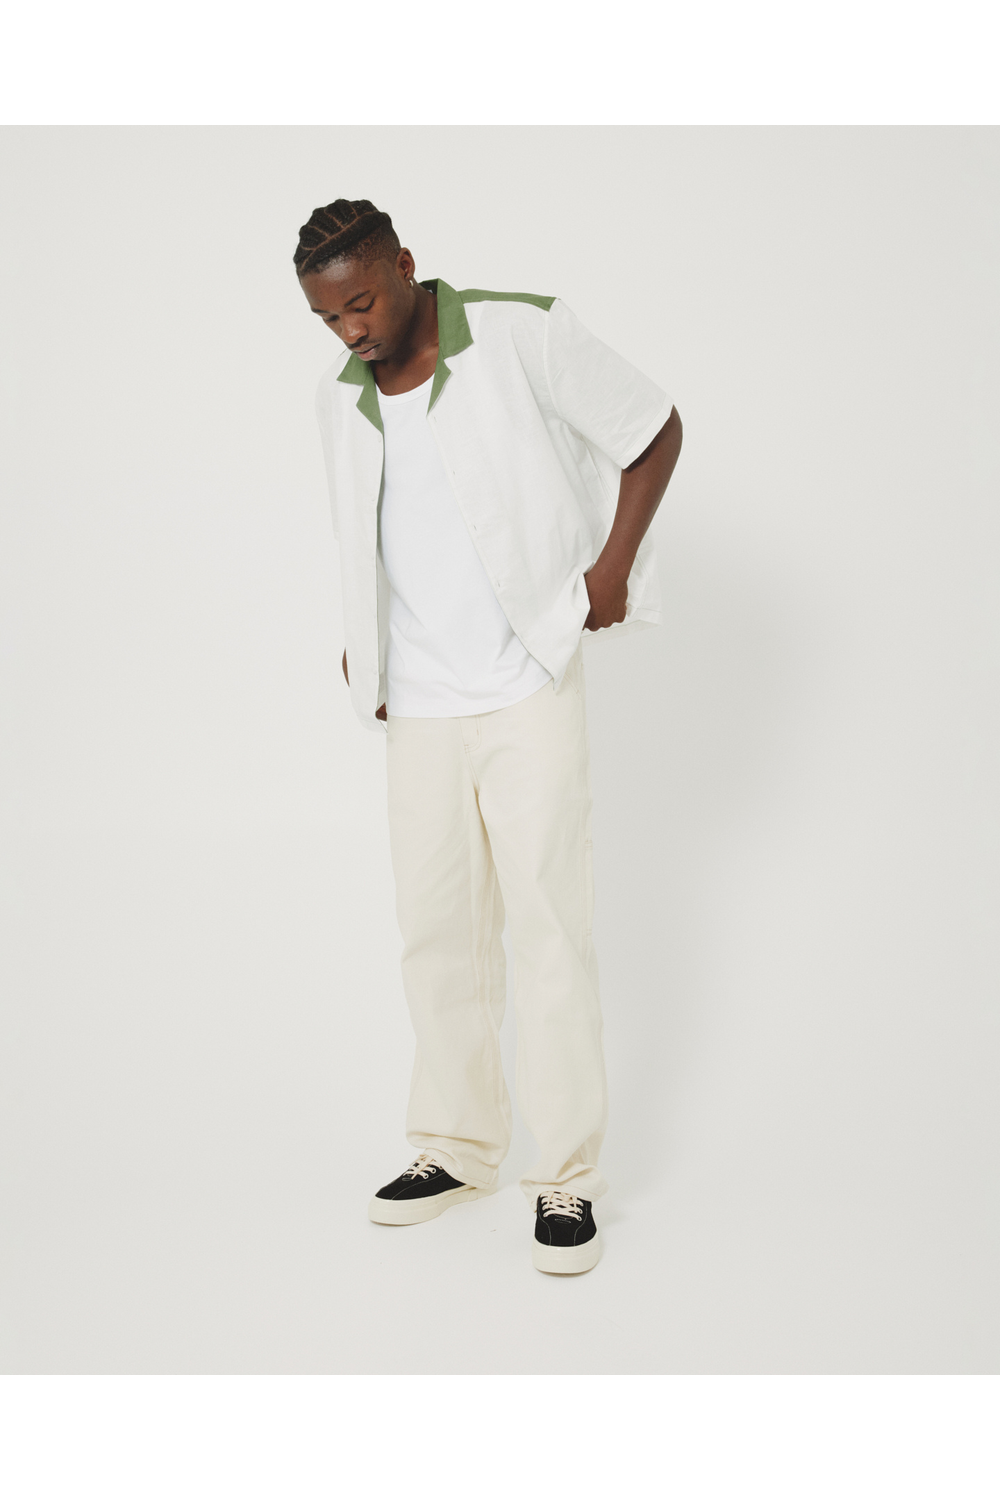 REVERE COLLAR SHIRT - NATURAL/OLIVE | COMMONERS | Mad About The Boy